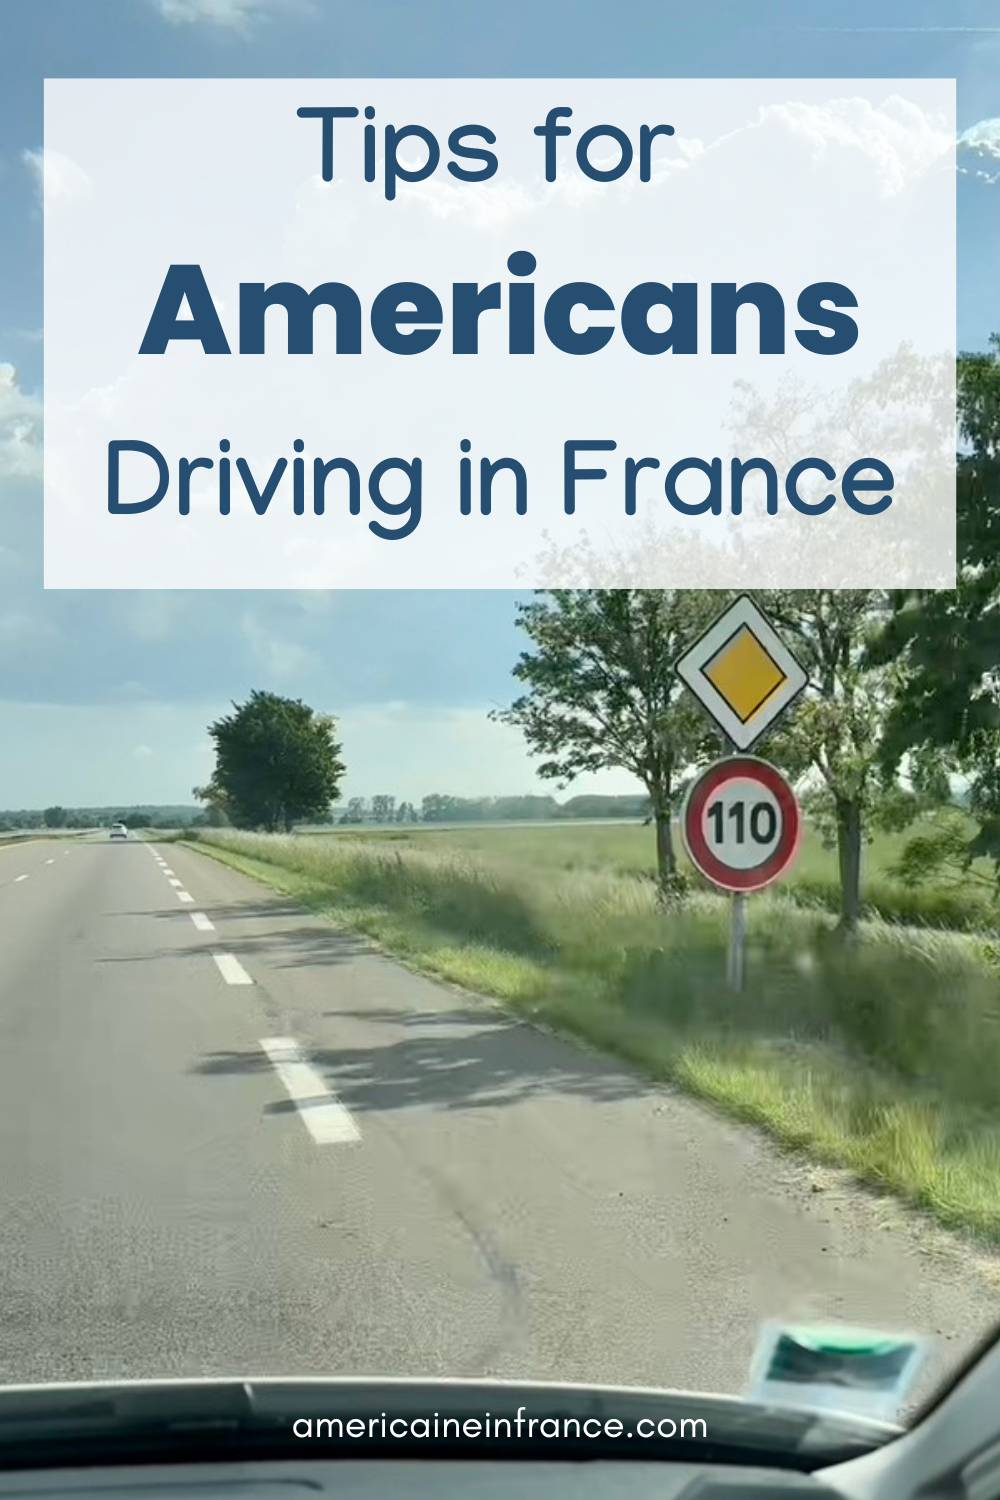 Tips for Americans Driving in France